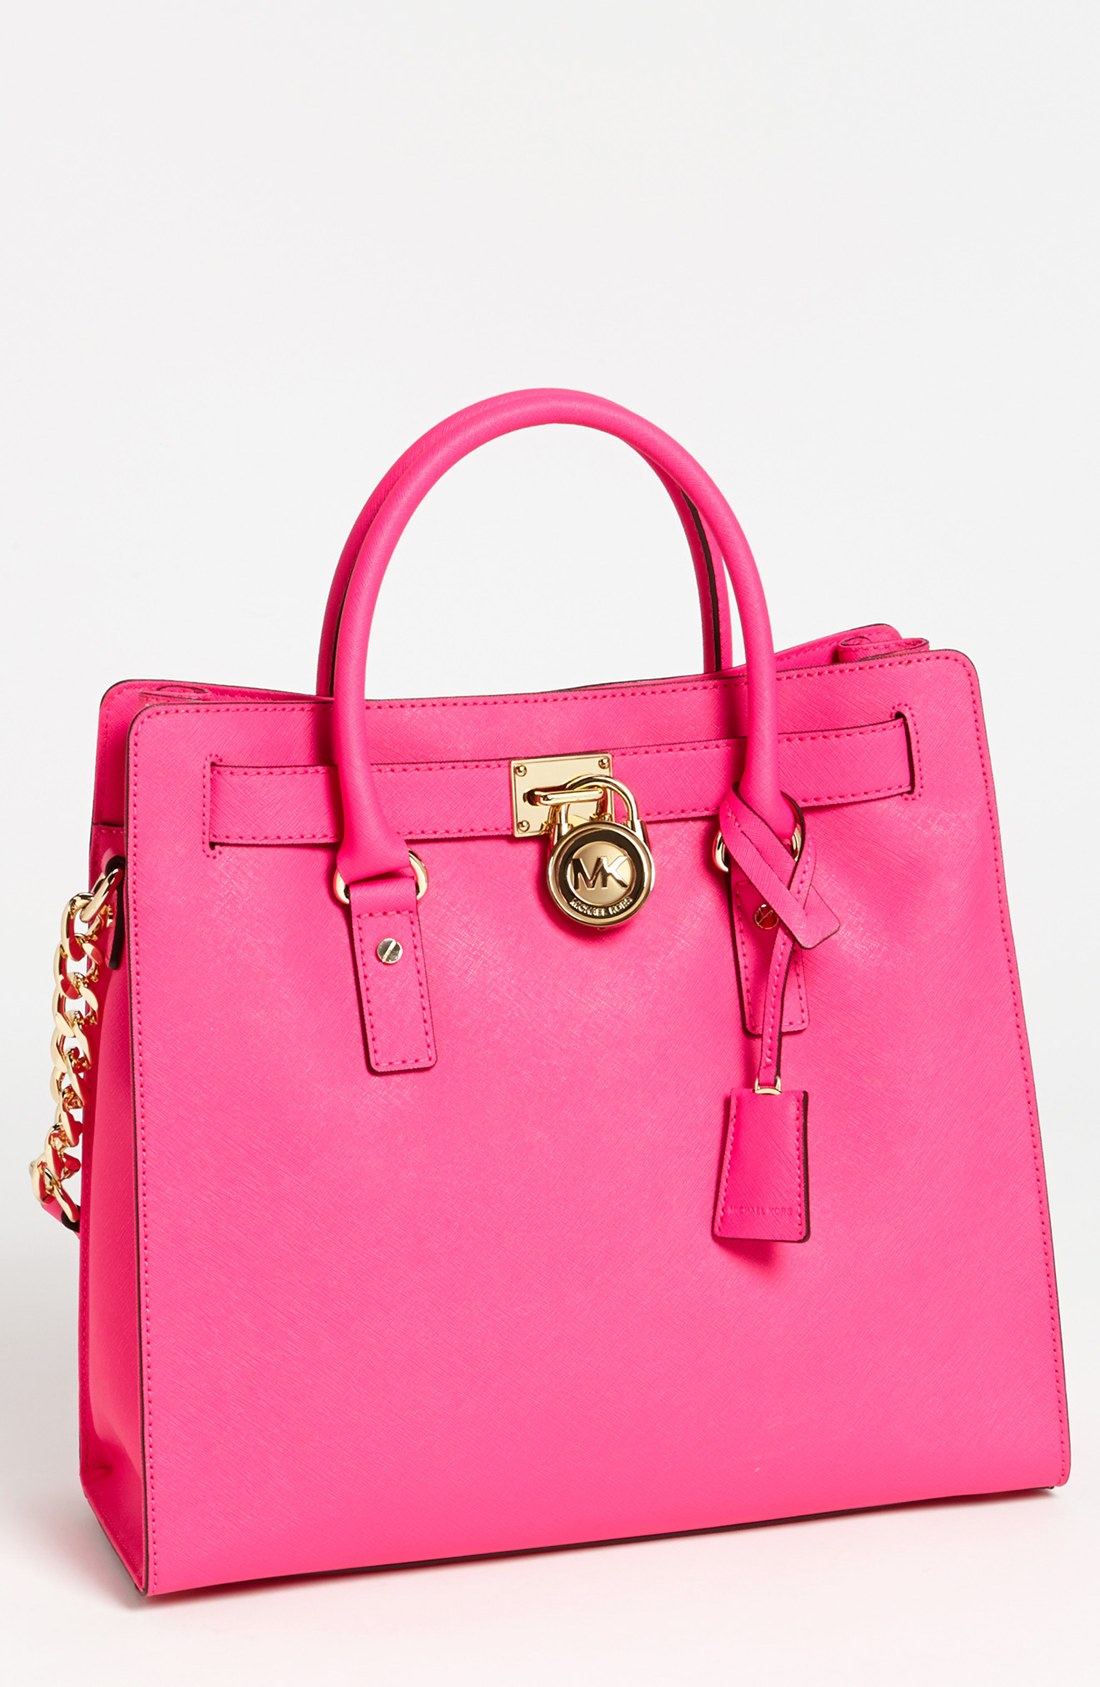 Michael Michael Kors Hamilton Large Saffiano Leather Tote in Pink (end of color list neon pink ...